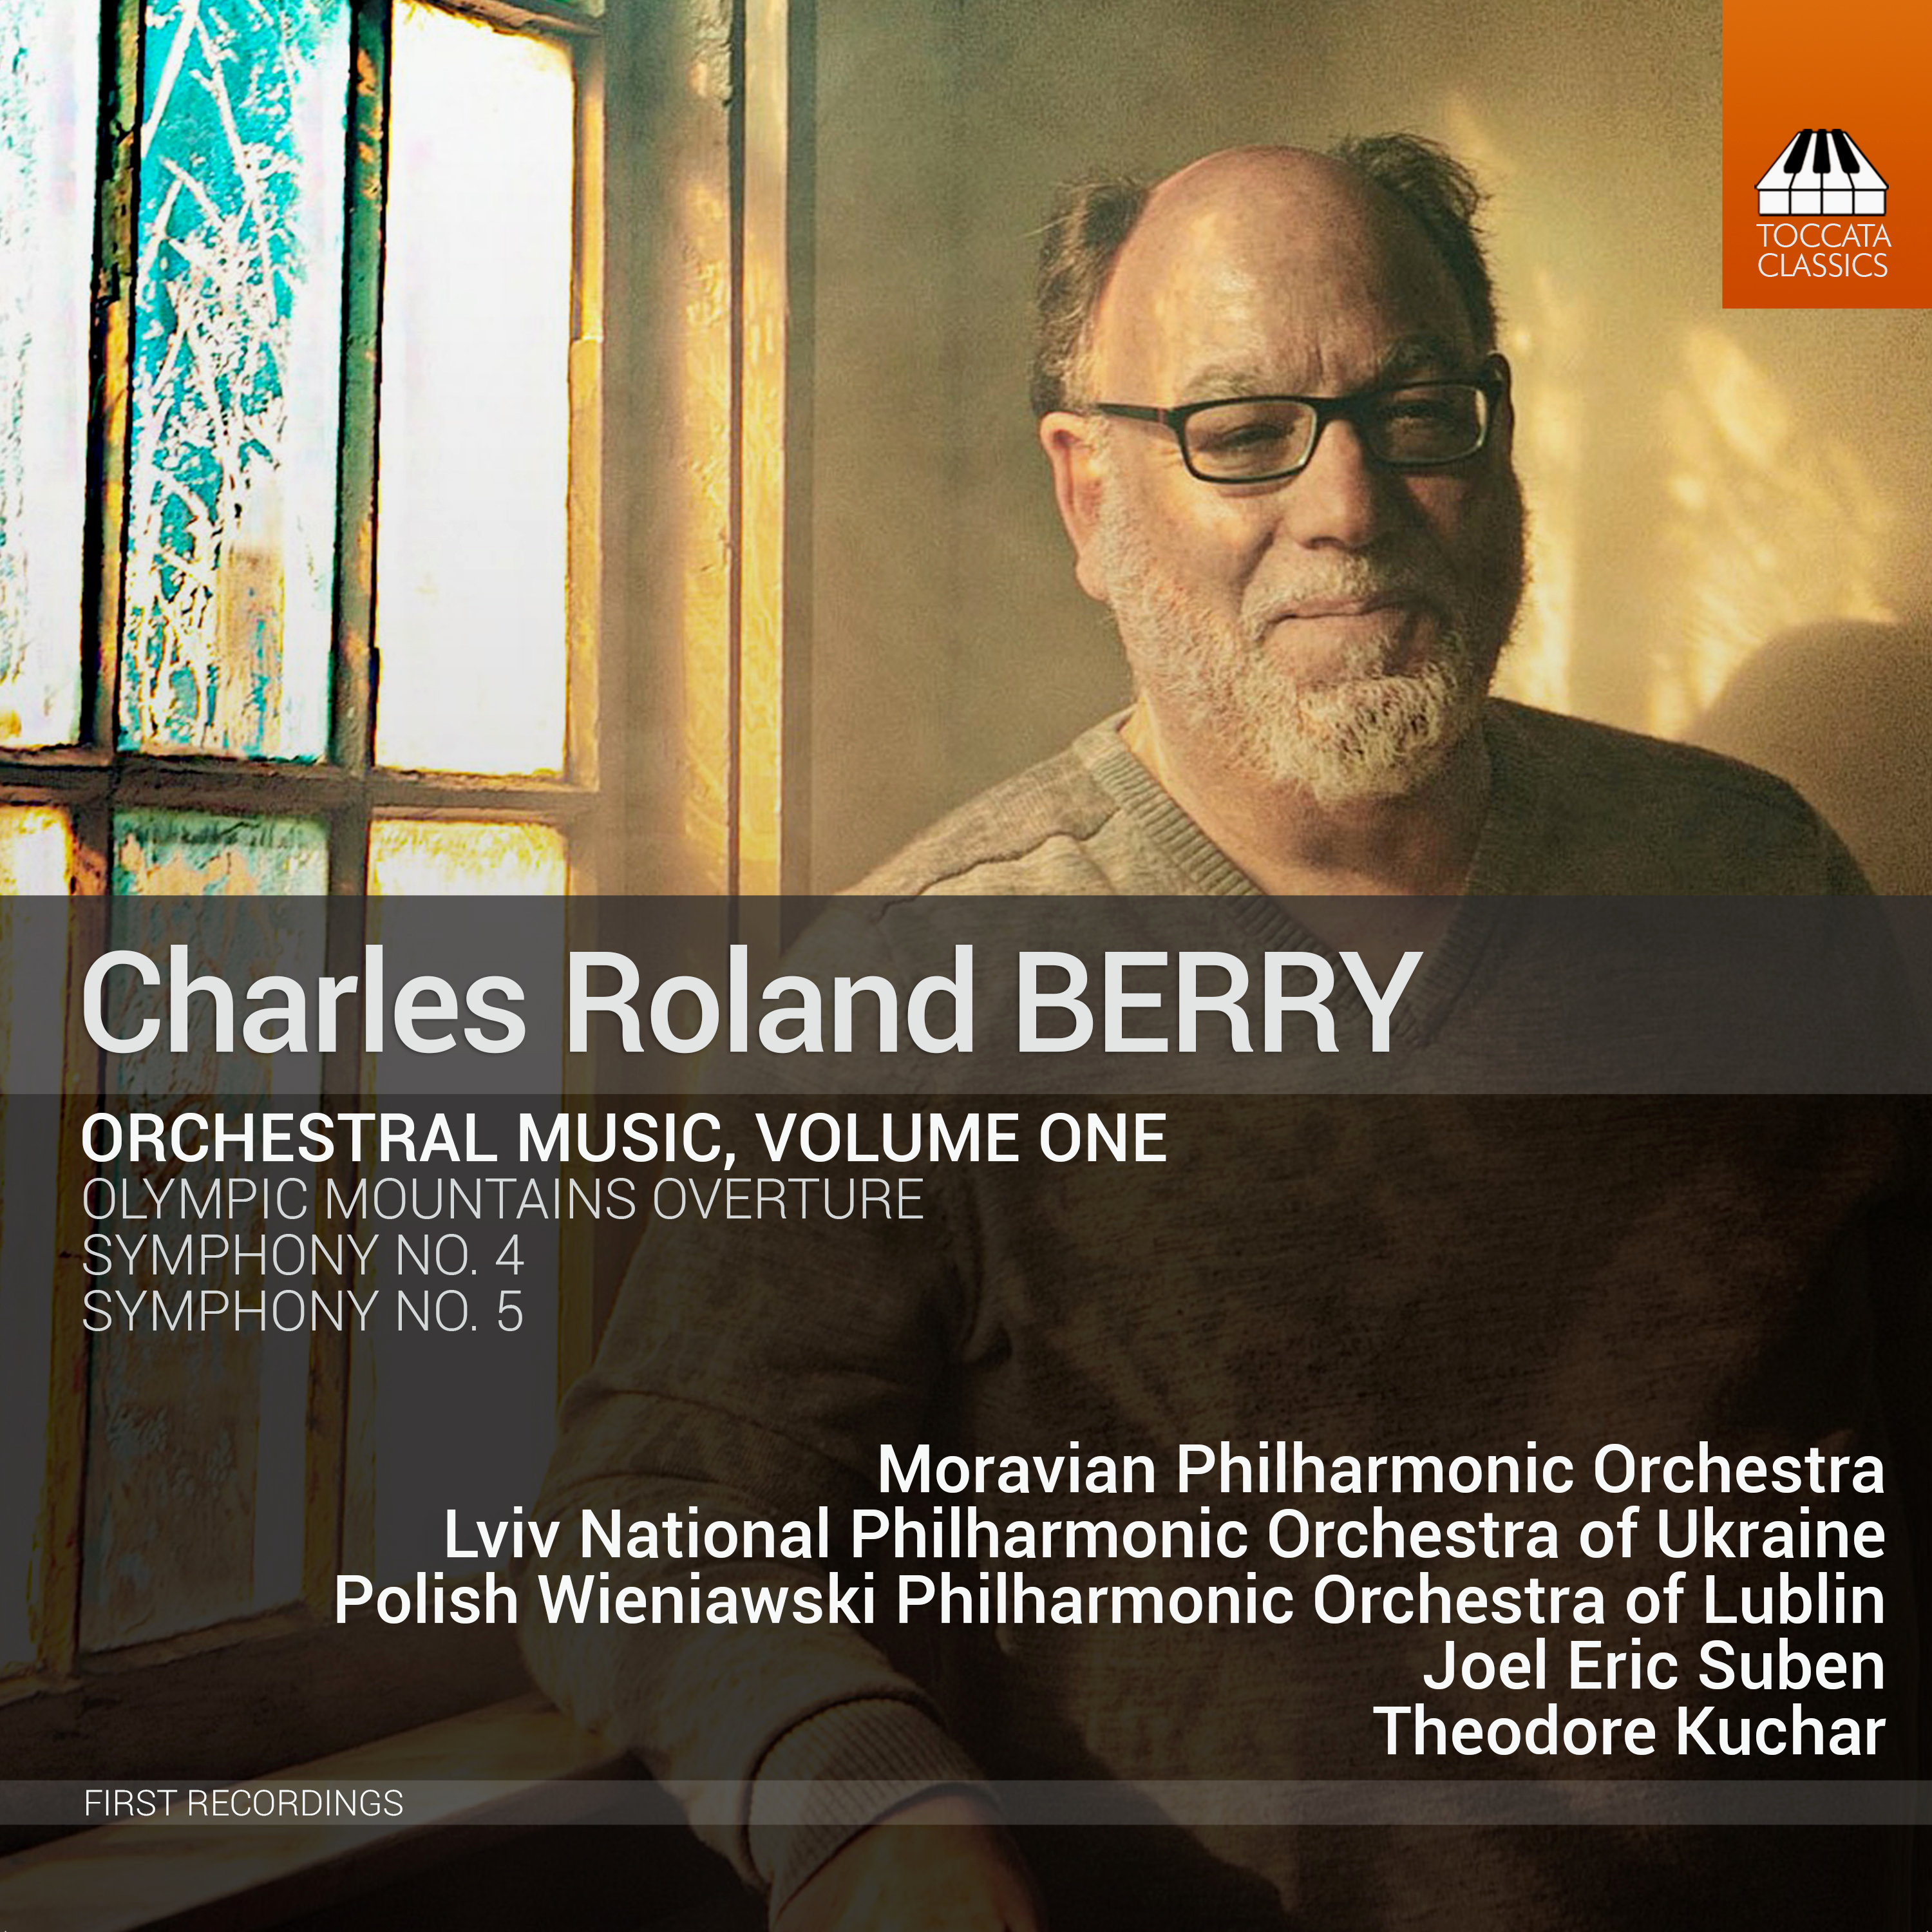 CHARLES ROLAND BERRY - Orchestral Music Vol. 1